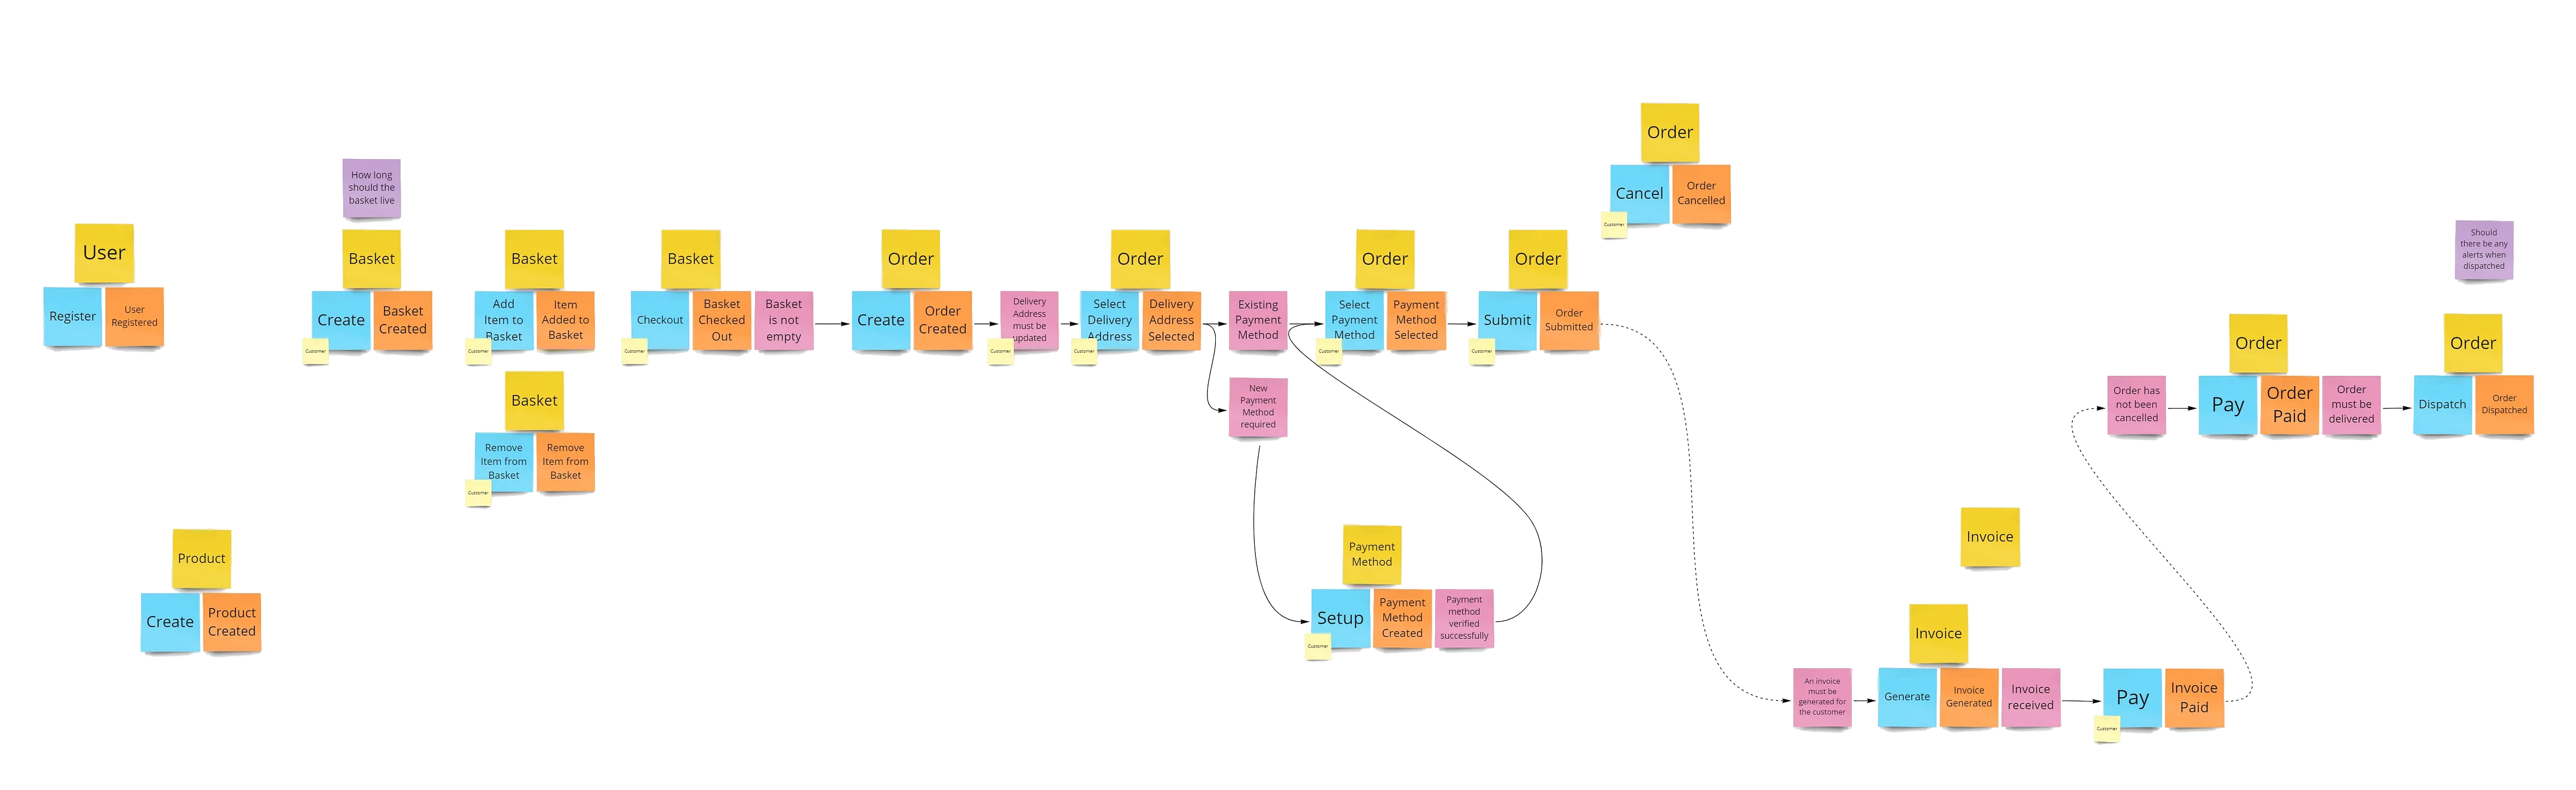 Event Storming with Aggregates